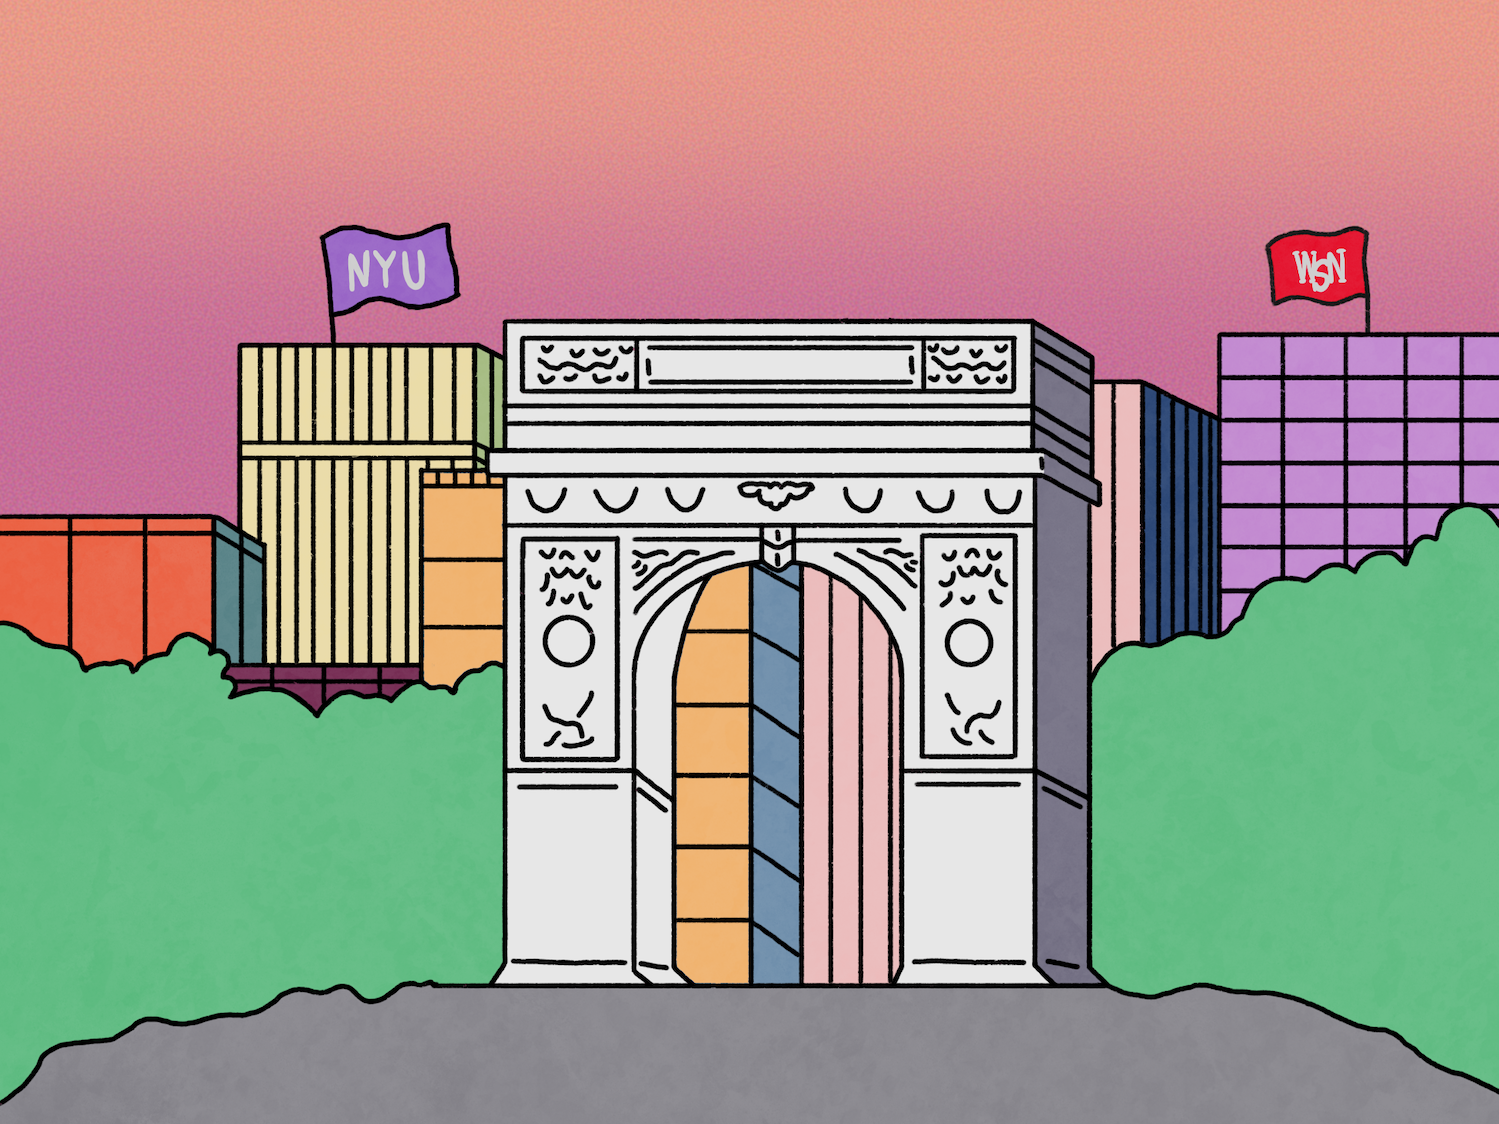 An illustration of the Washington Square Arch, surrounded by green bushes in front of several pastel-colored buildings. On top of one building is a purple flag reading N.Y.U., and on top of another is a red flag reading W.S.N. The sky is colored with a pastel-pink gradient.